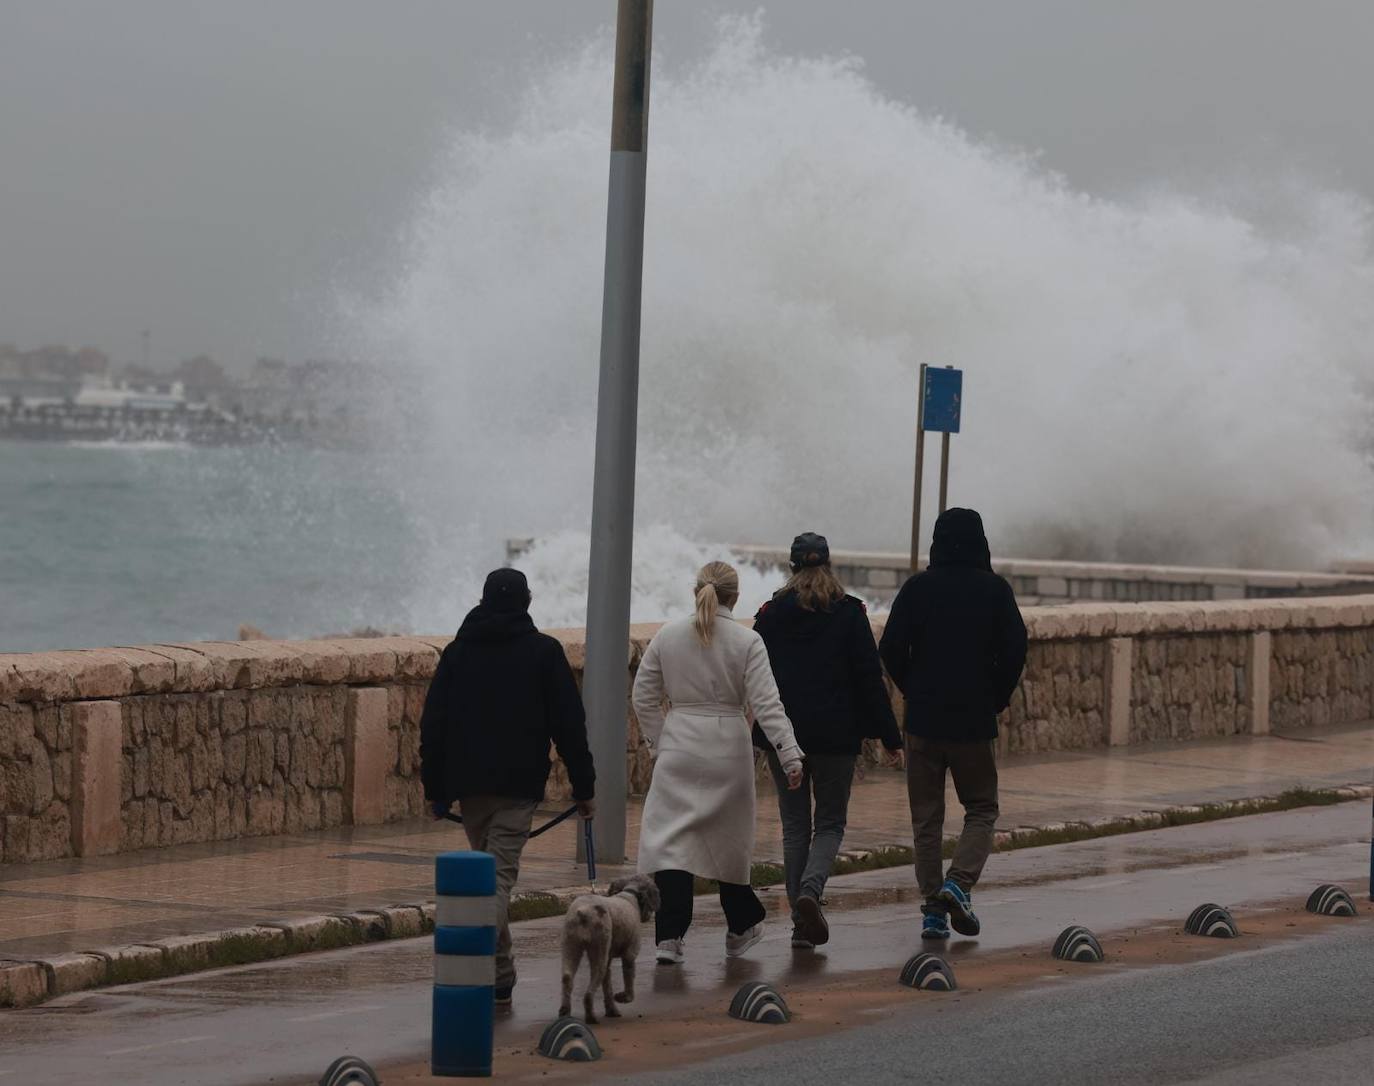 Photographs of the damage to the beaches of the Costa del Sol due to the storm